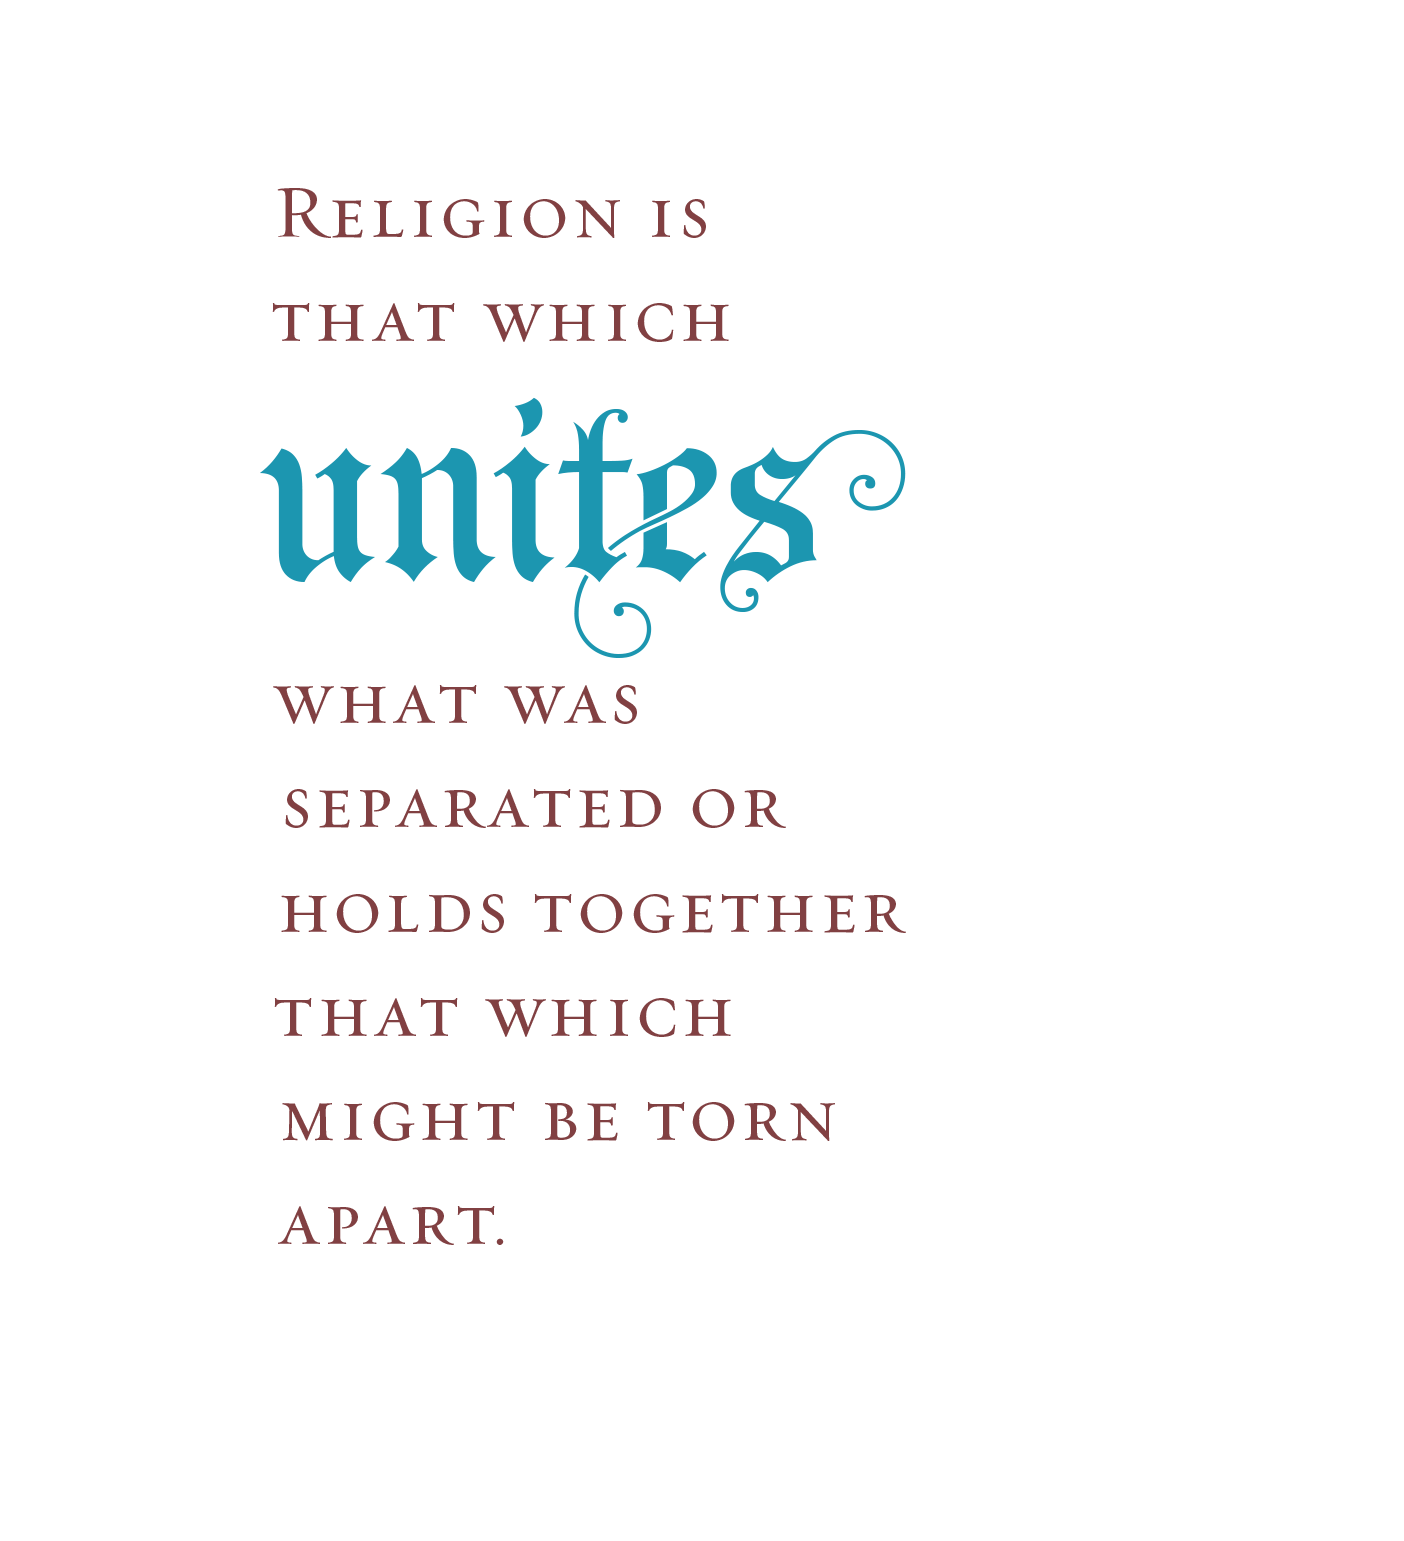 Designed pull quote: "Religion is that which unites what was separated or holds together that which might be torn apart.